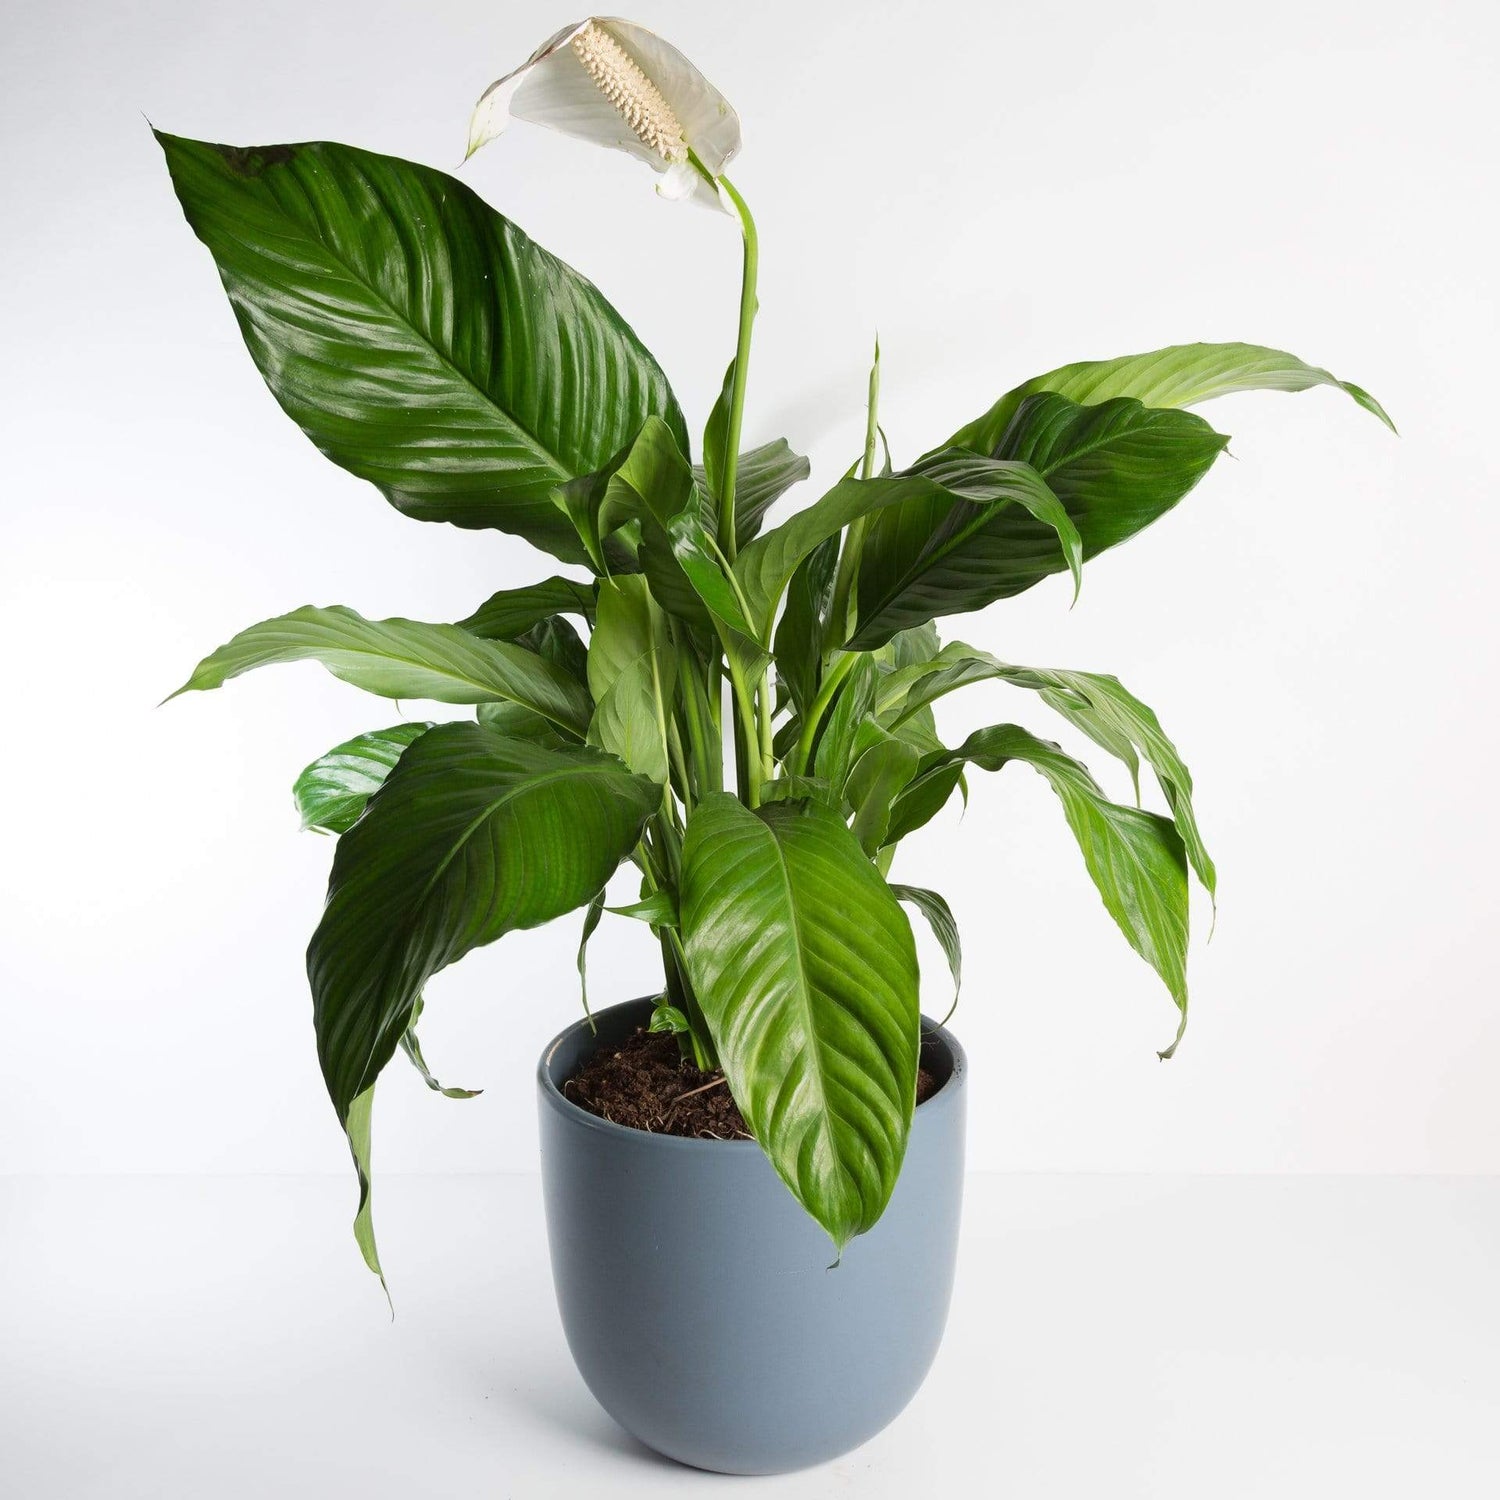 Urban Sprouts Plant 6" in nursery pot Peace Lily 'Viscount'